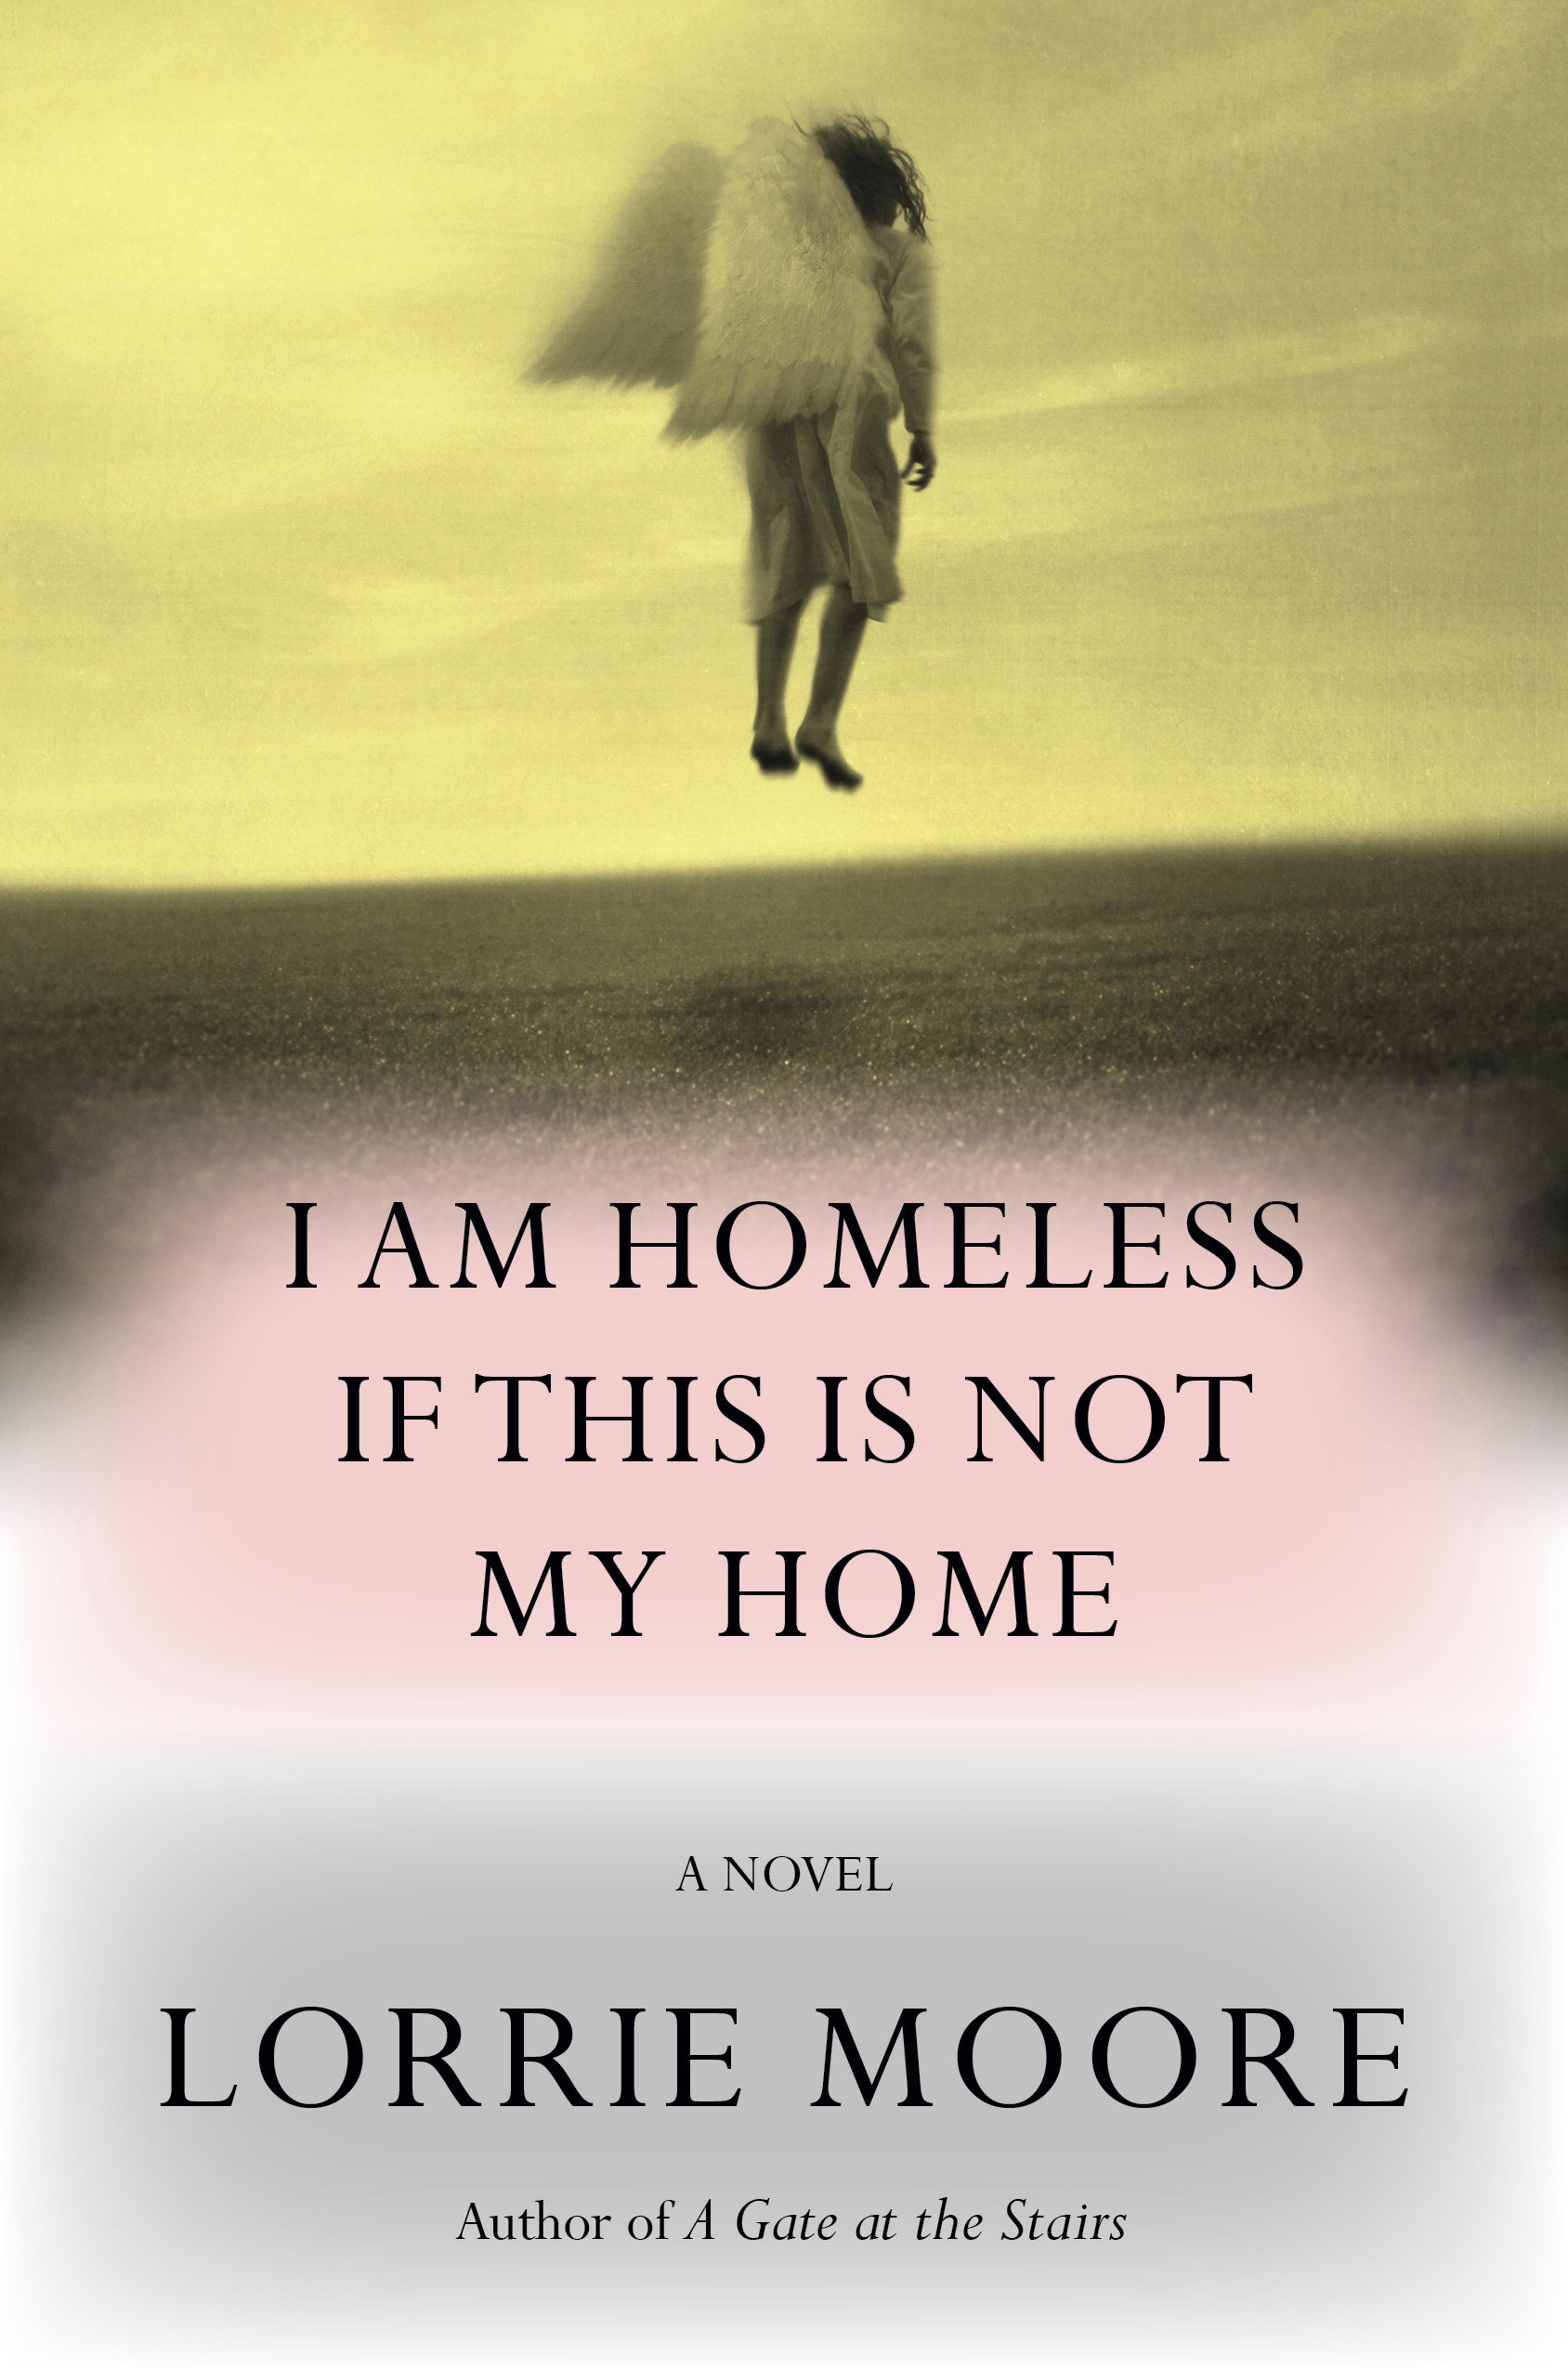 I Am Homeless If This Is Not My Home (Hardcover Book)